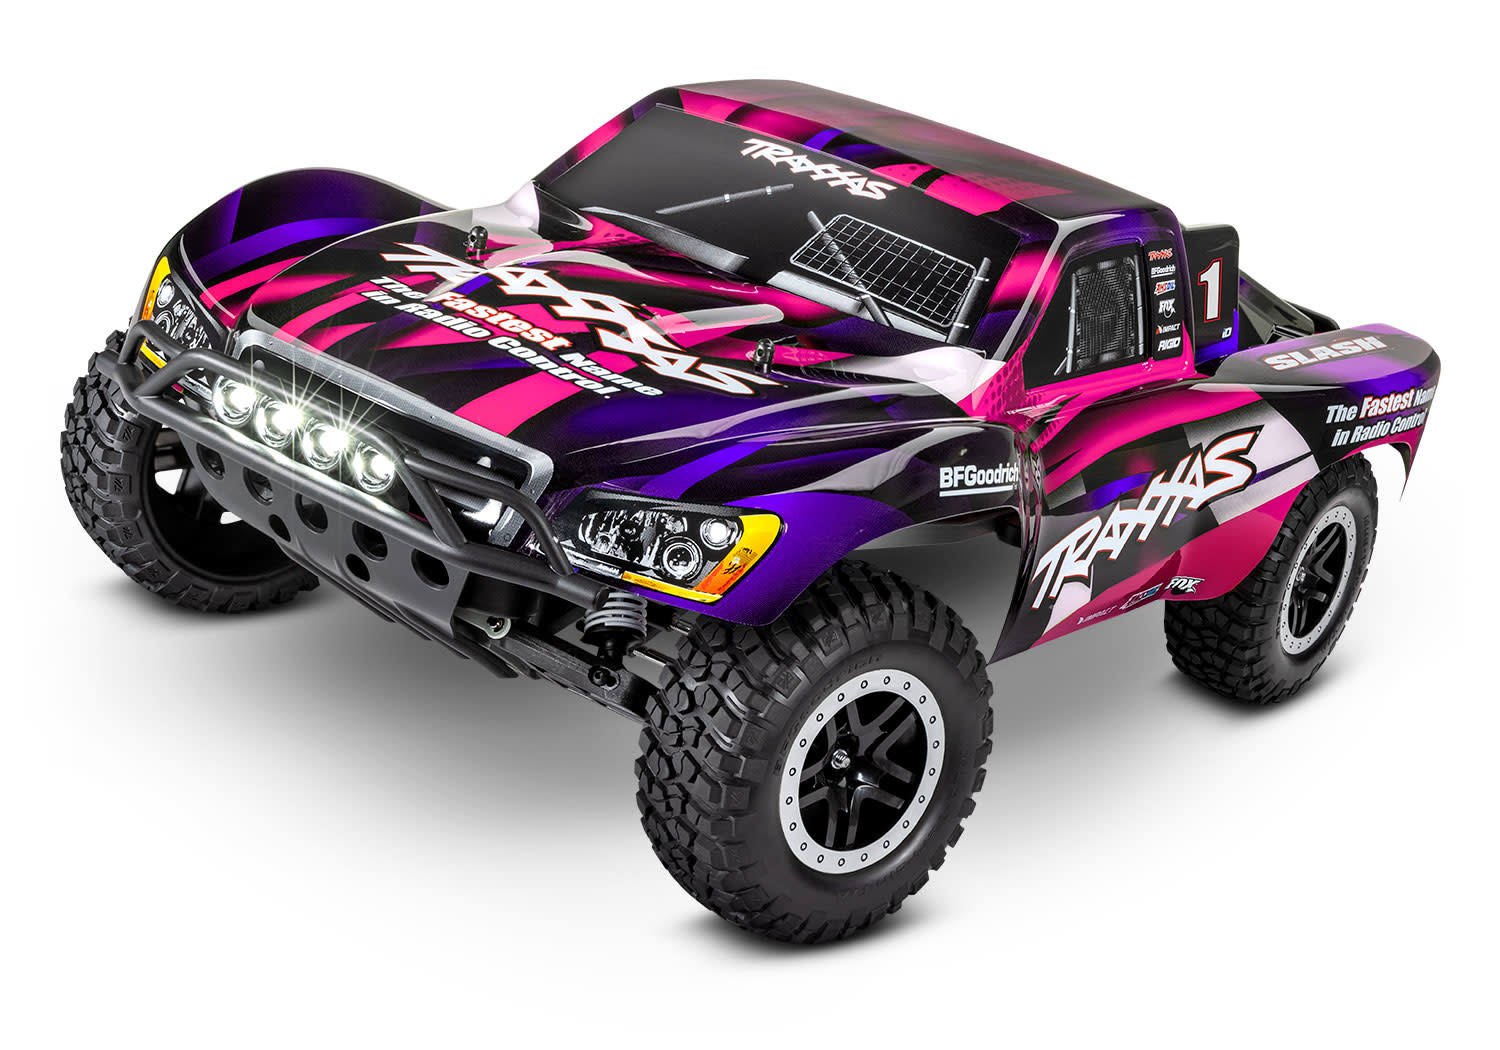 TRAXXAS TRA 58034-61-PINK Slash: 1/10-Scale 2WD Short Course Racing Truck. Ready-To-Race with TQ 2.4GHz radio system, XL-5 ESC (fwd/rev), and LED